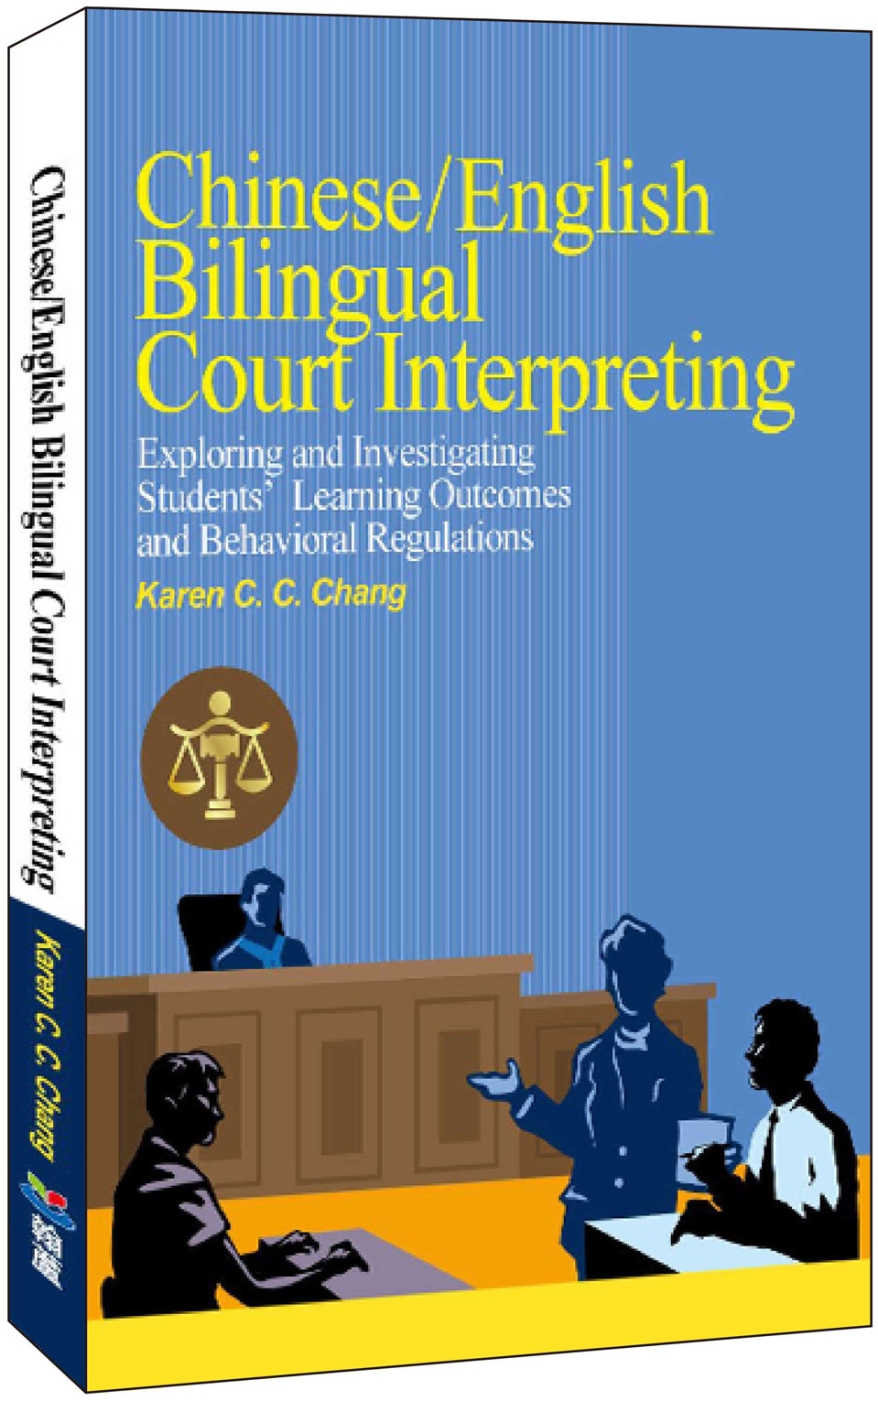 Chinese/English Bilingual Court Interpreting: Exploring and Investigating Students’ Learning Outcomes and Behavioral Reg